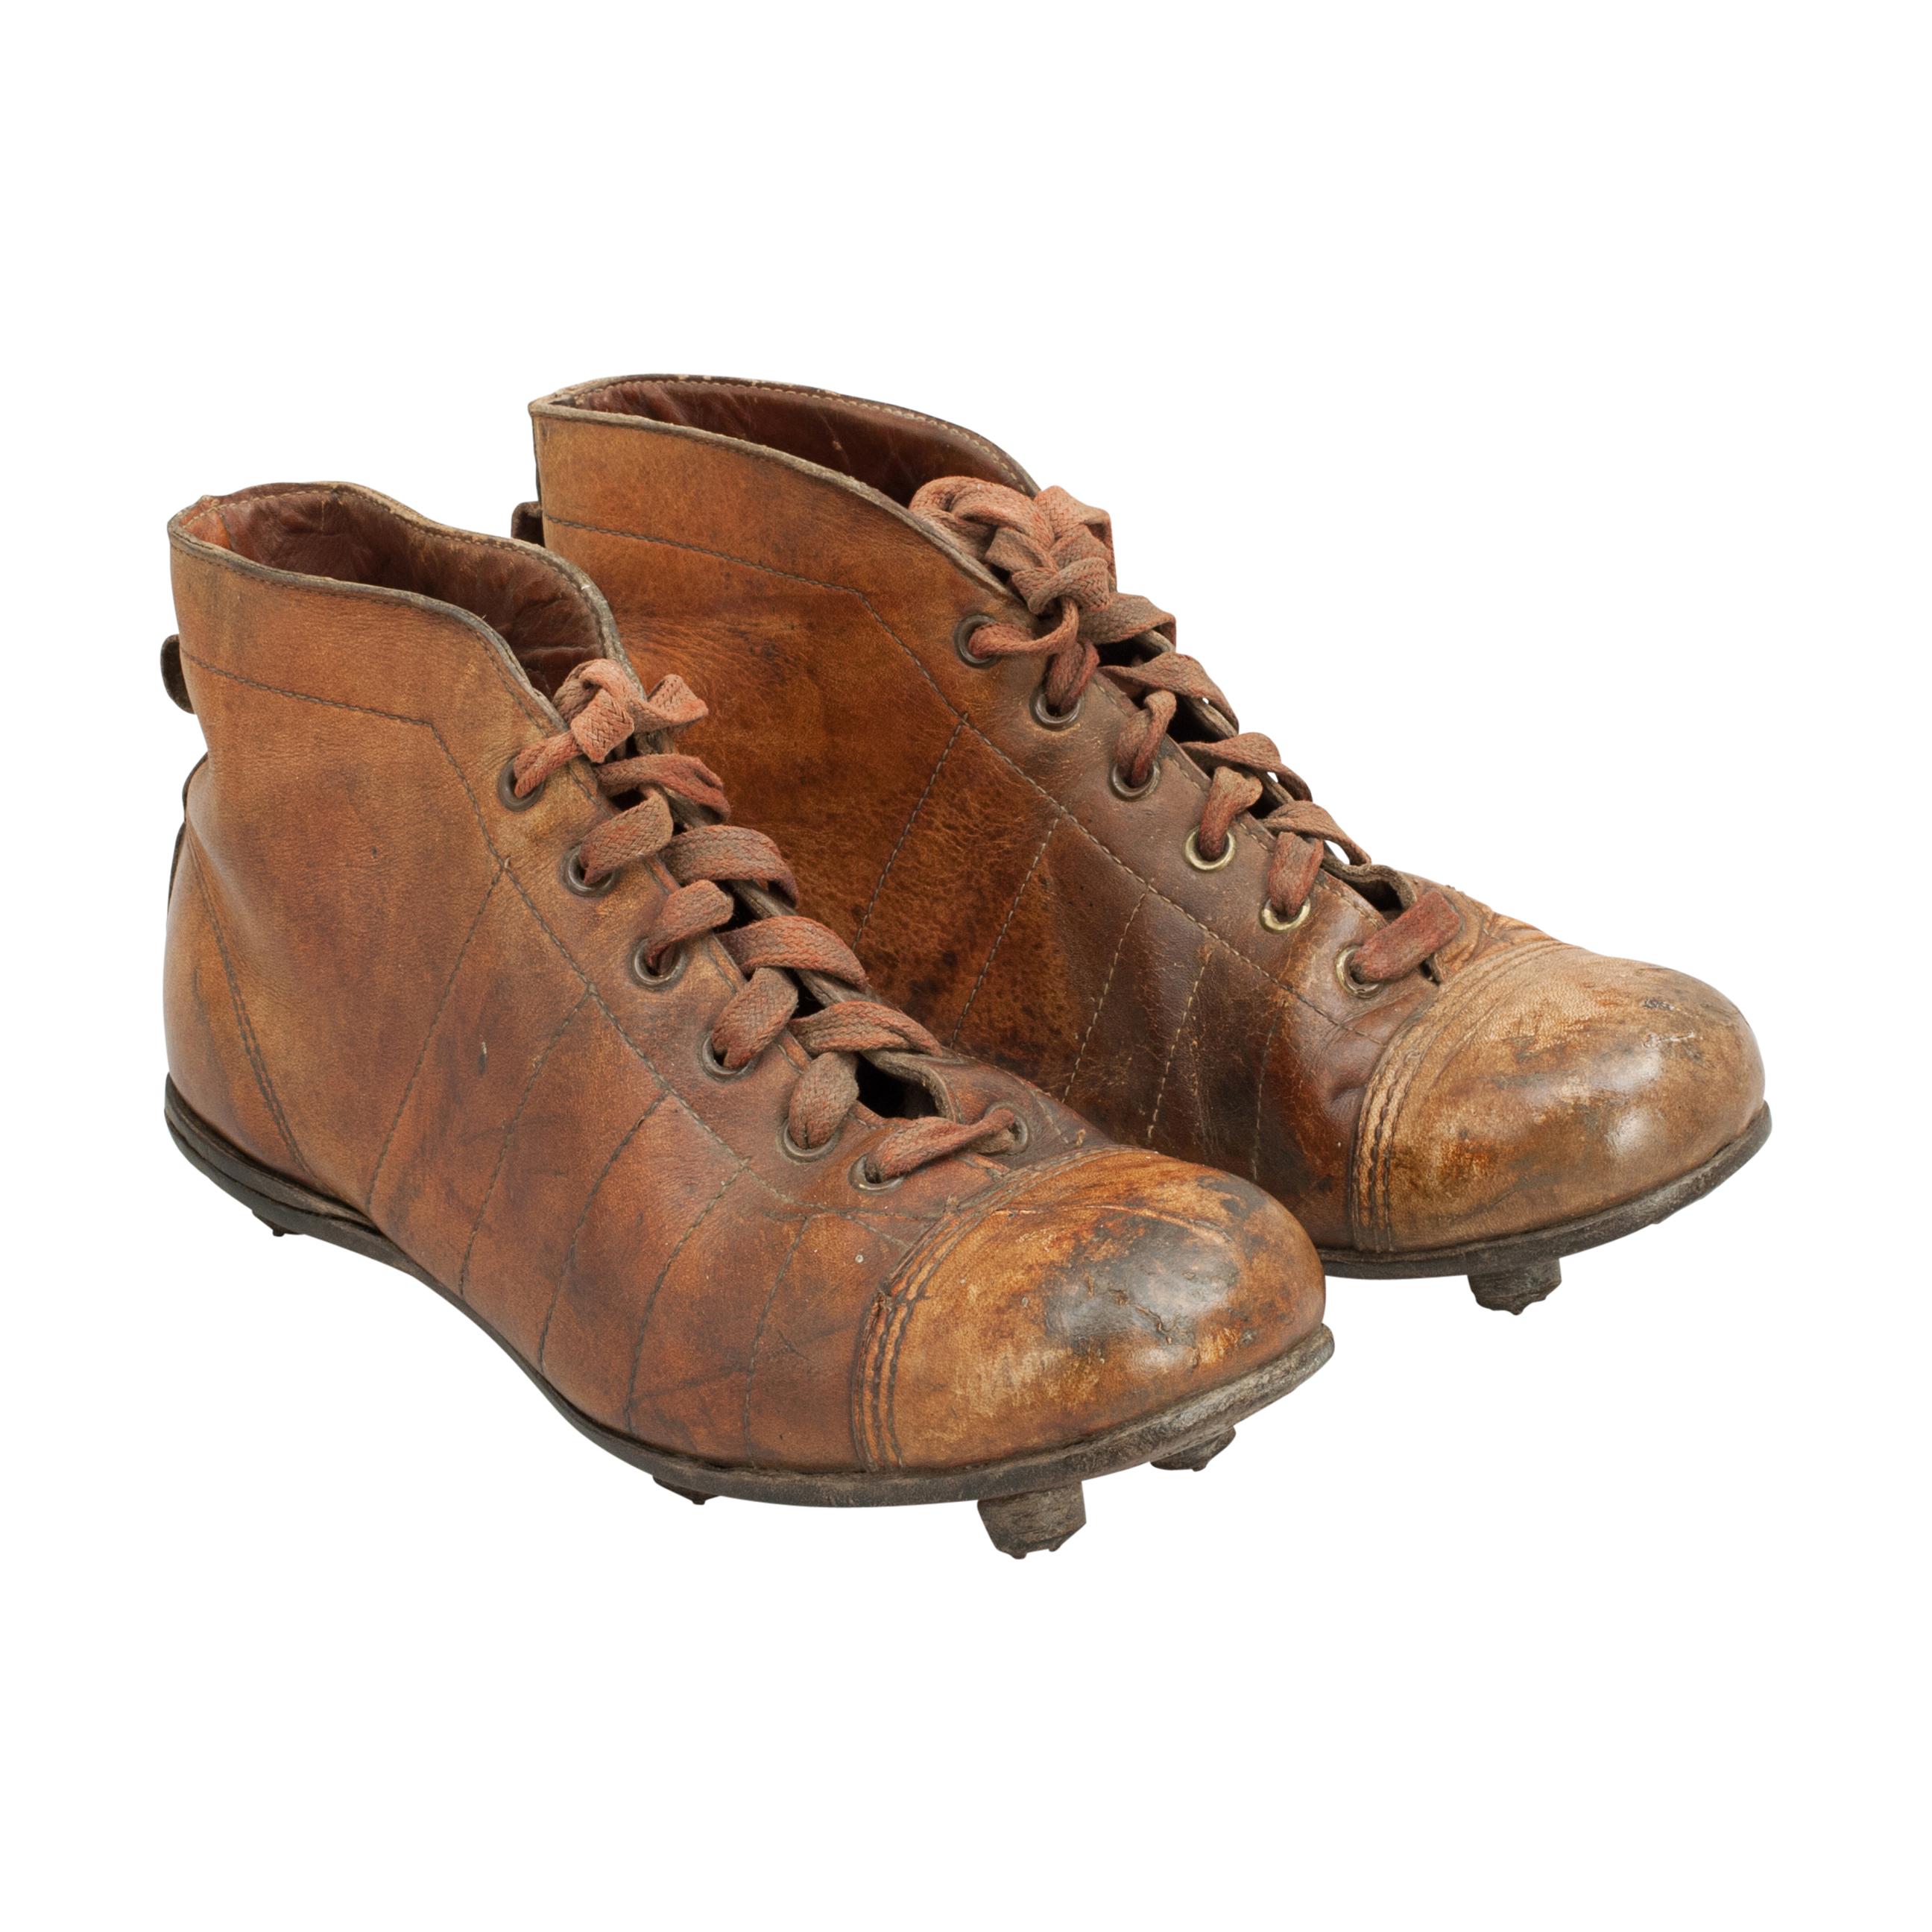 Football Boots - 2 For Sale on 1stDibs | old football boots, antique  football boots, old football boots for sale